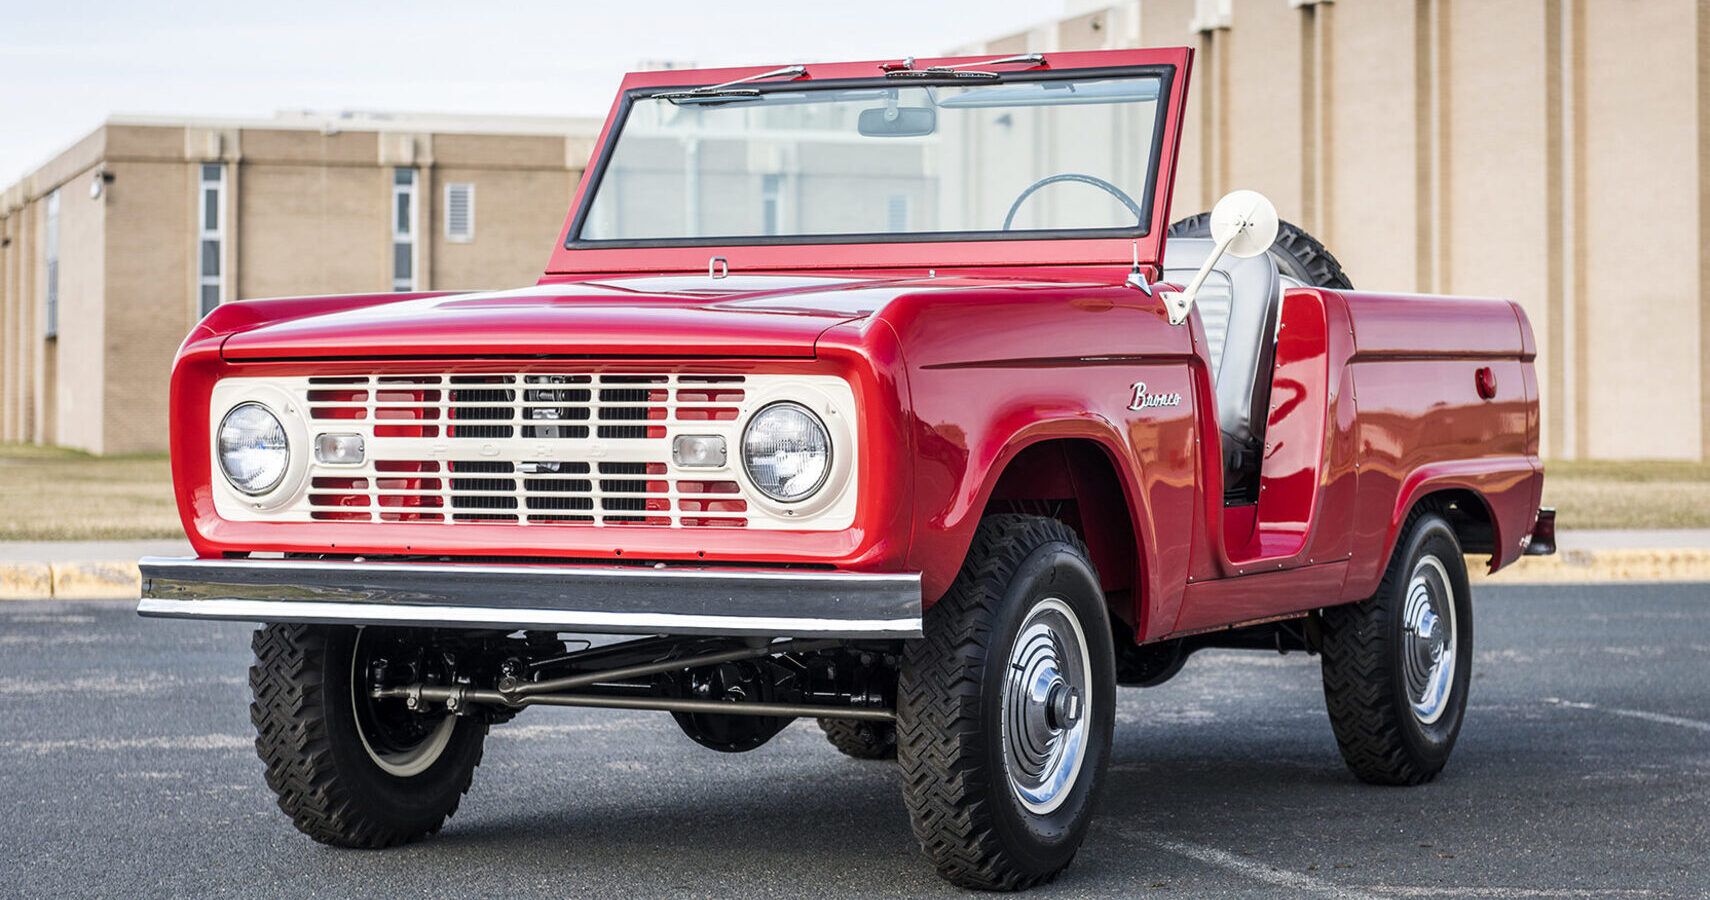 10 Classic American Cars That Have Appreciated In Value